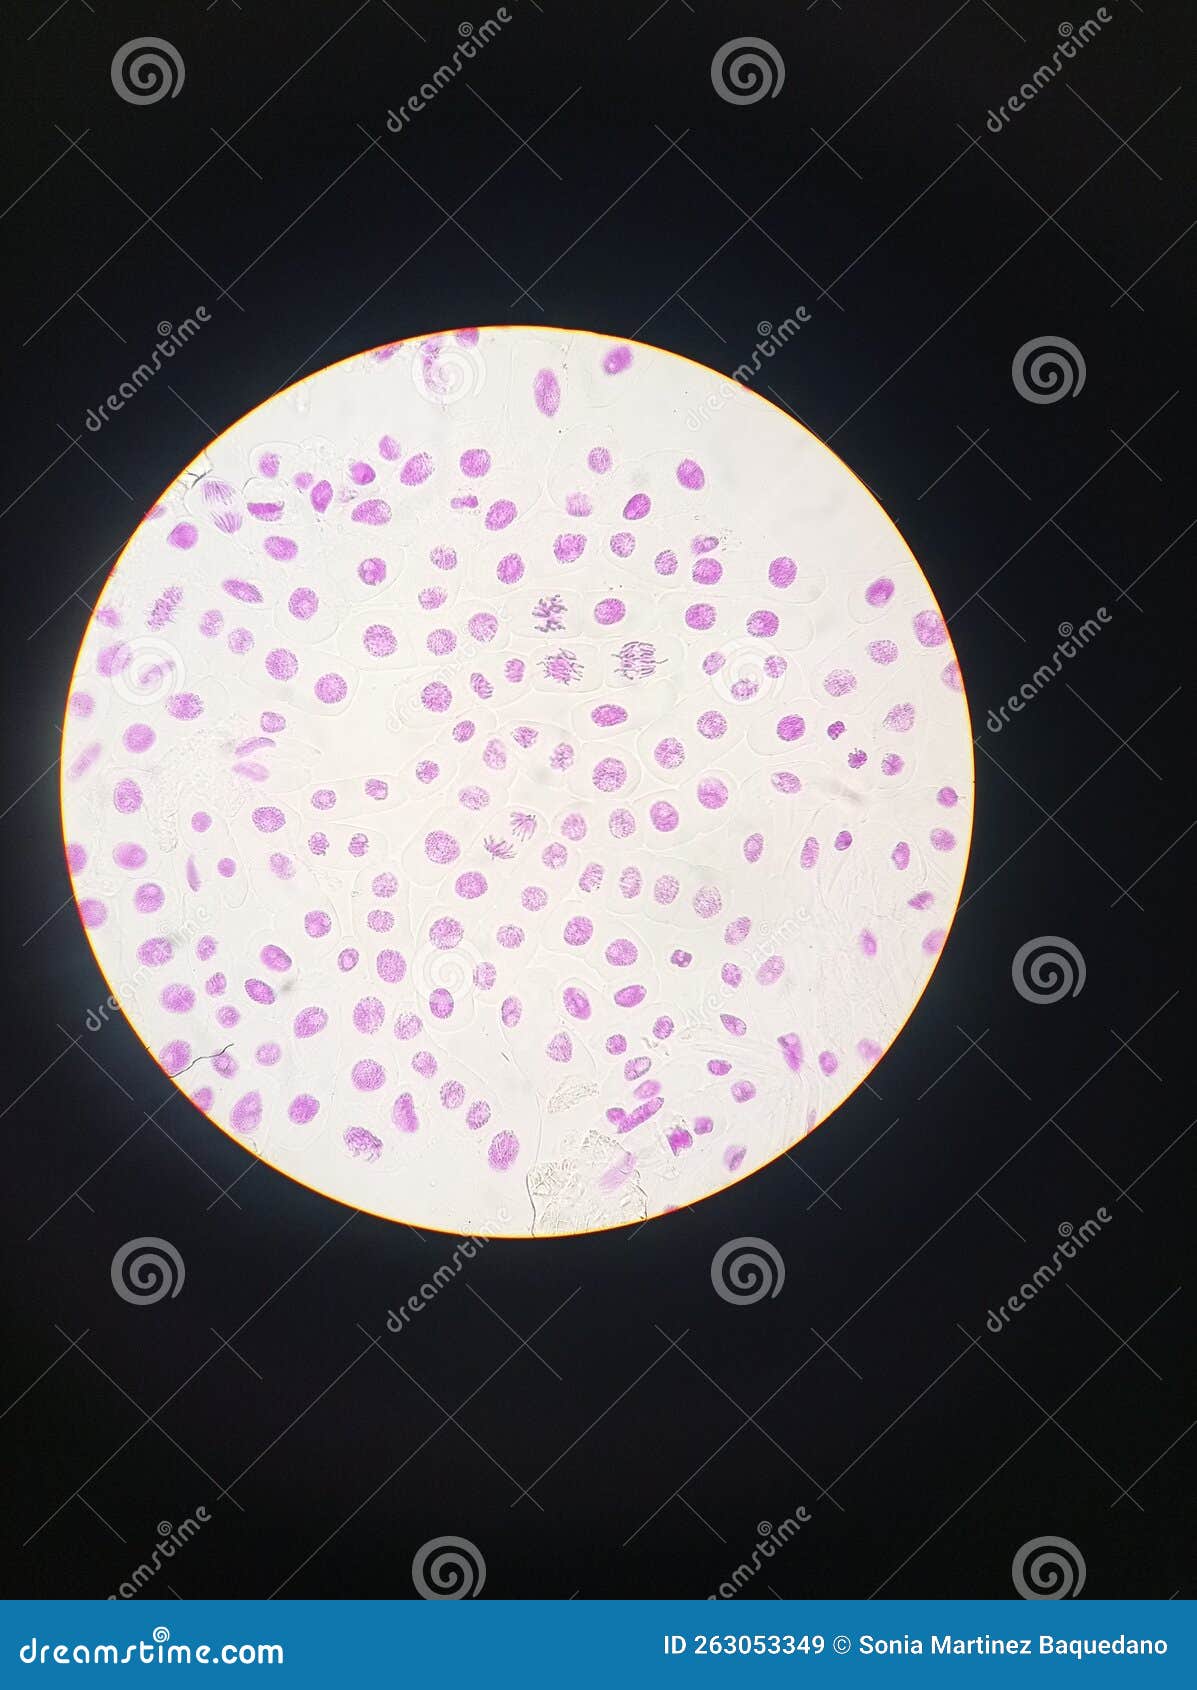 mitosis cell division. animal eukaryotic cell. painted purple, seen in an optic microscope